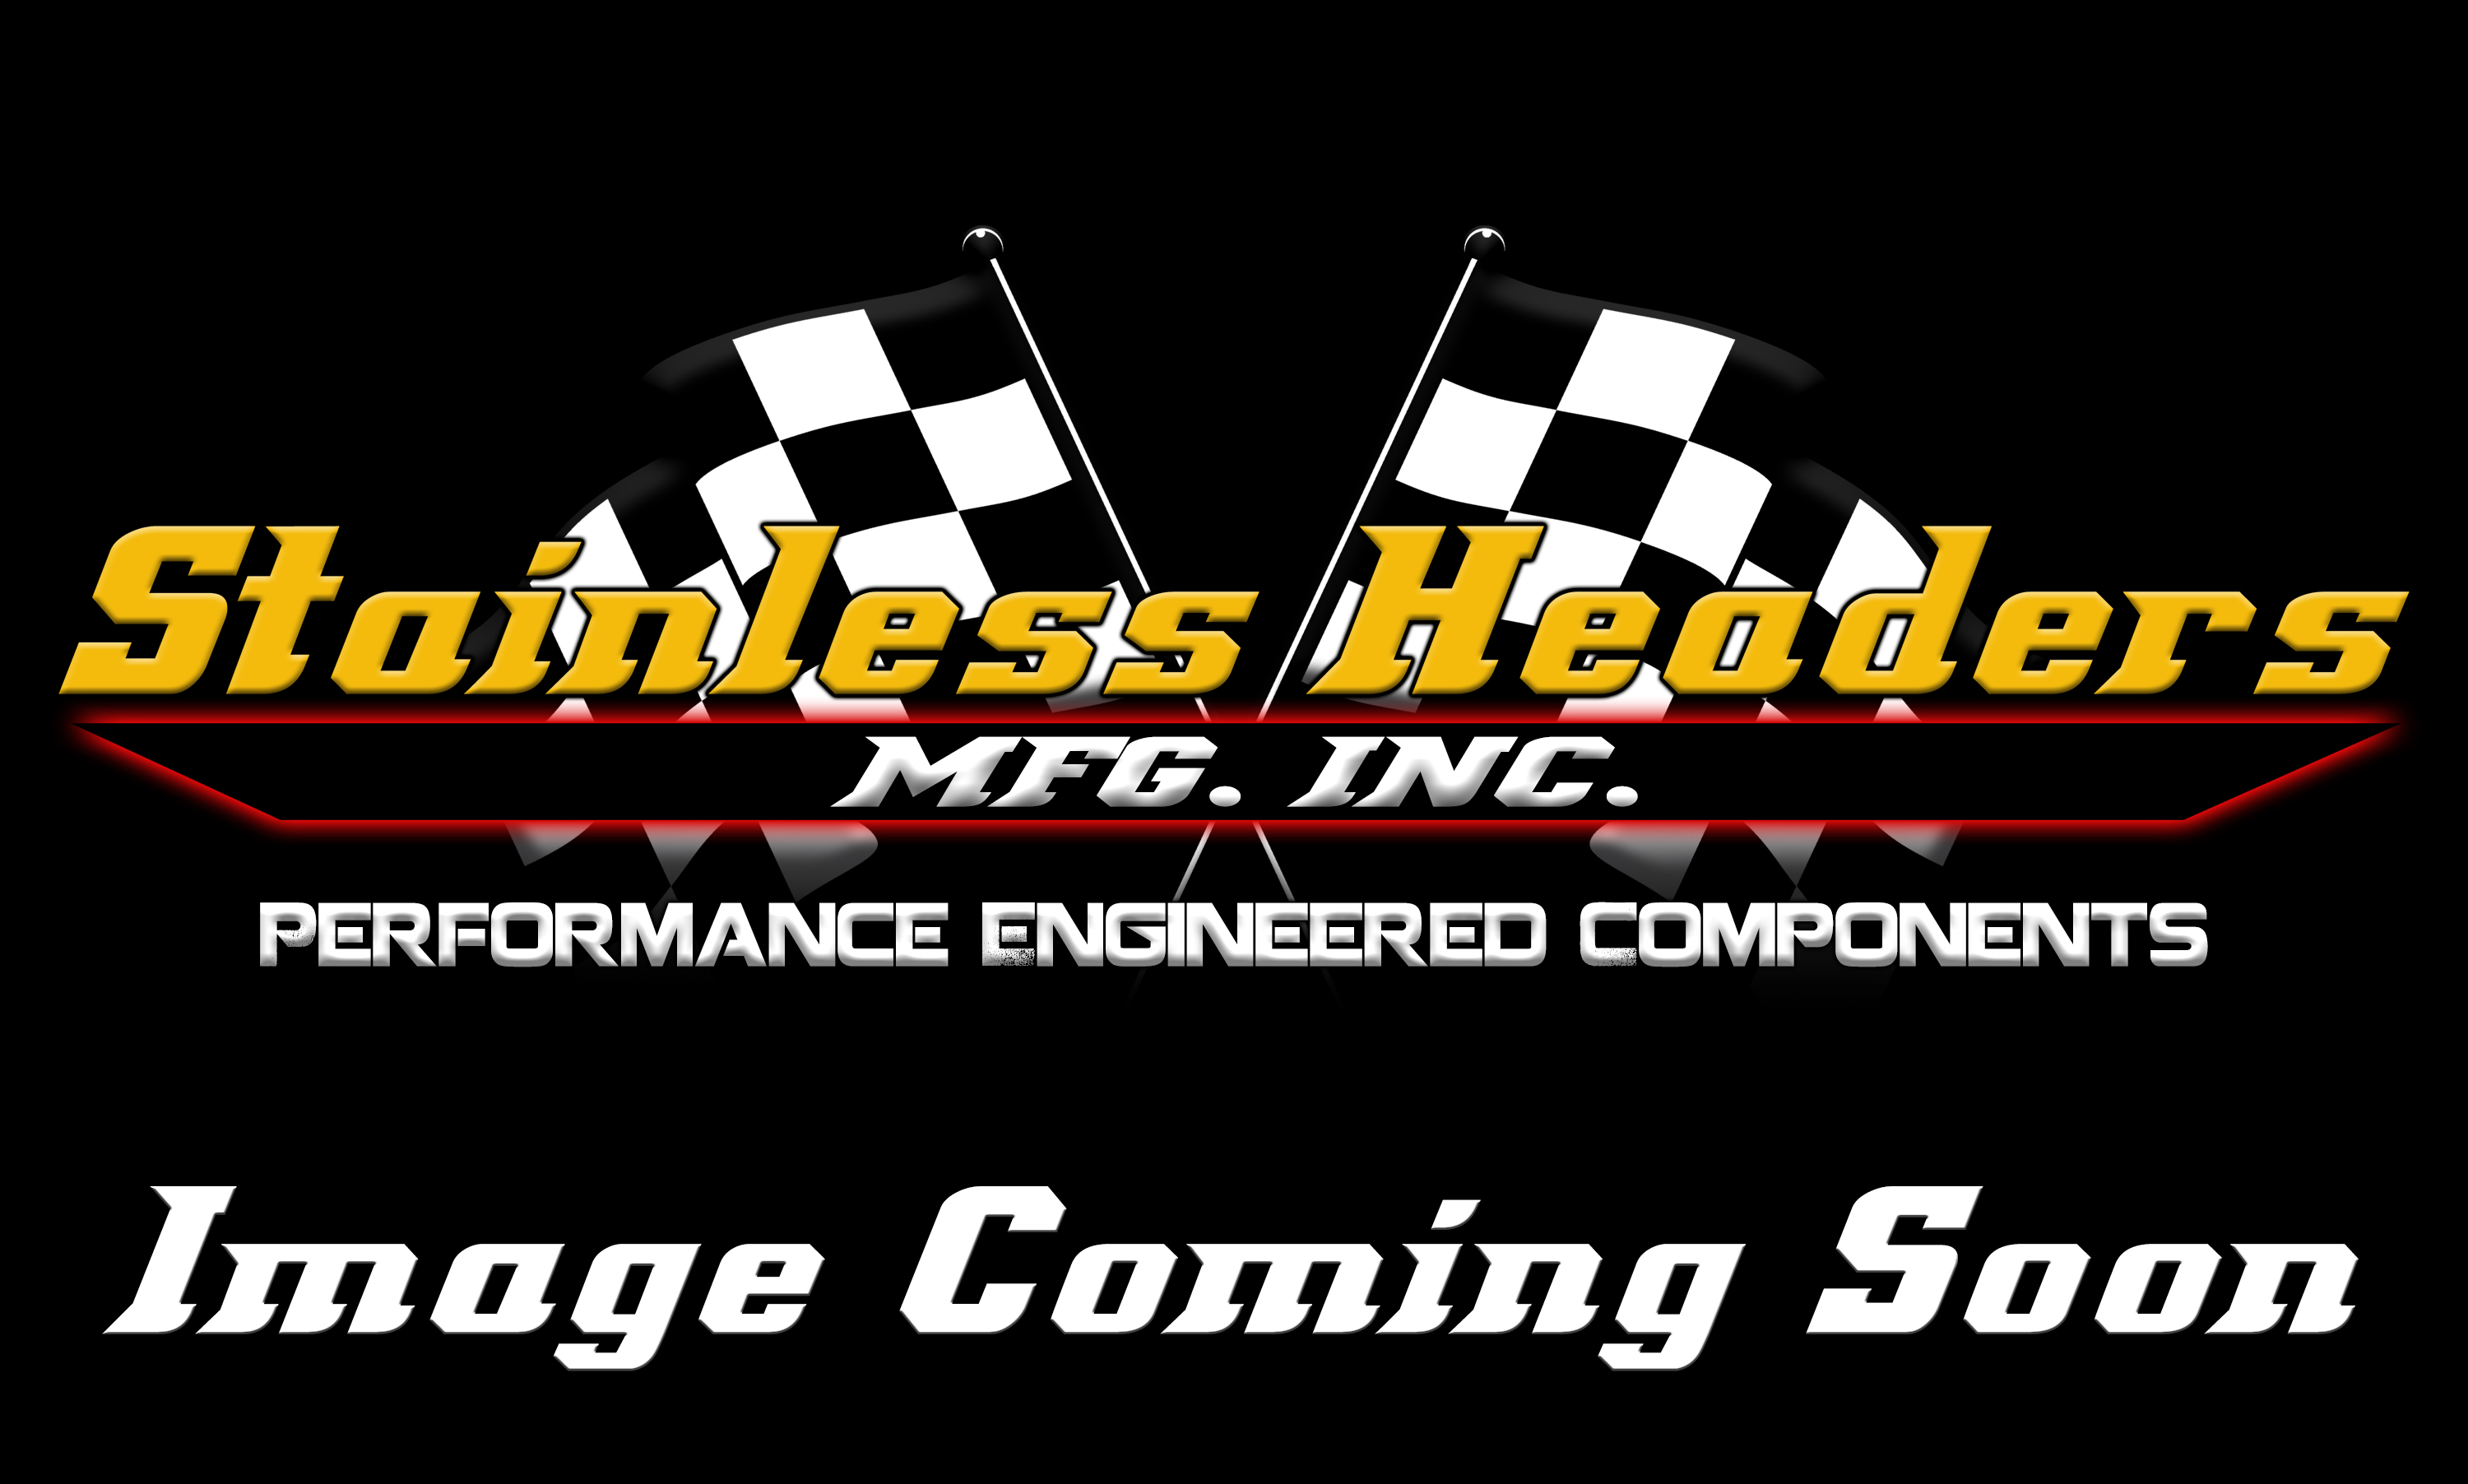 CompTurbo Technology Turbochargers - Comp Turbo Journal Bearing Turbochargers - CompTurbo Technologies - CTR3793S-6467 360 Journal Bearing Turbocharger (925 HP)